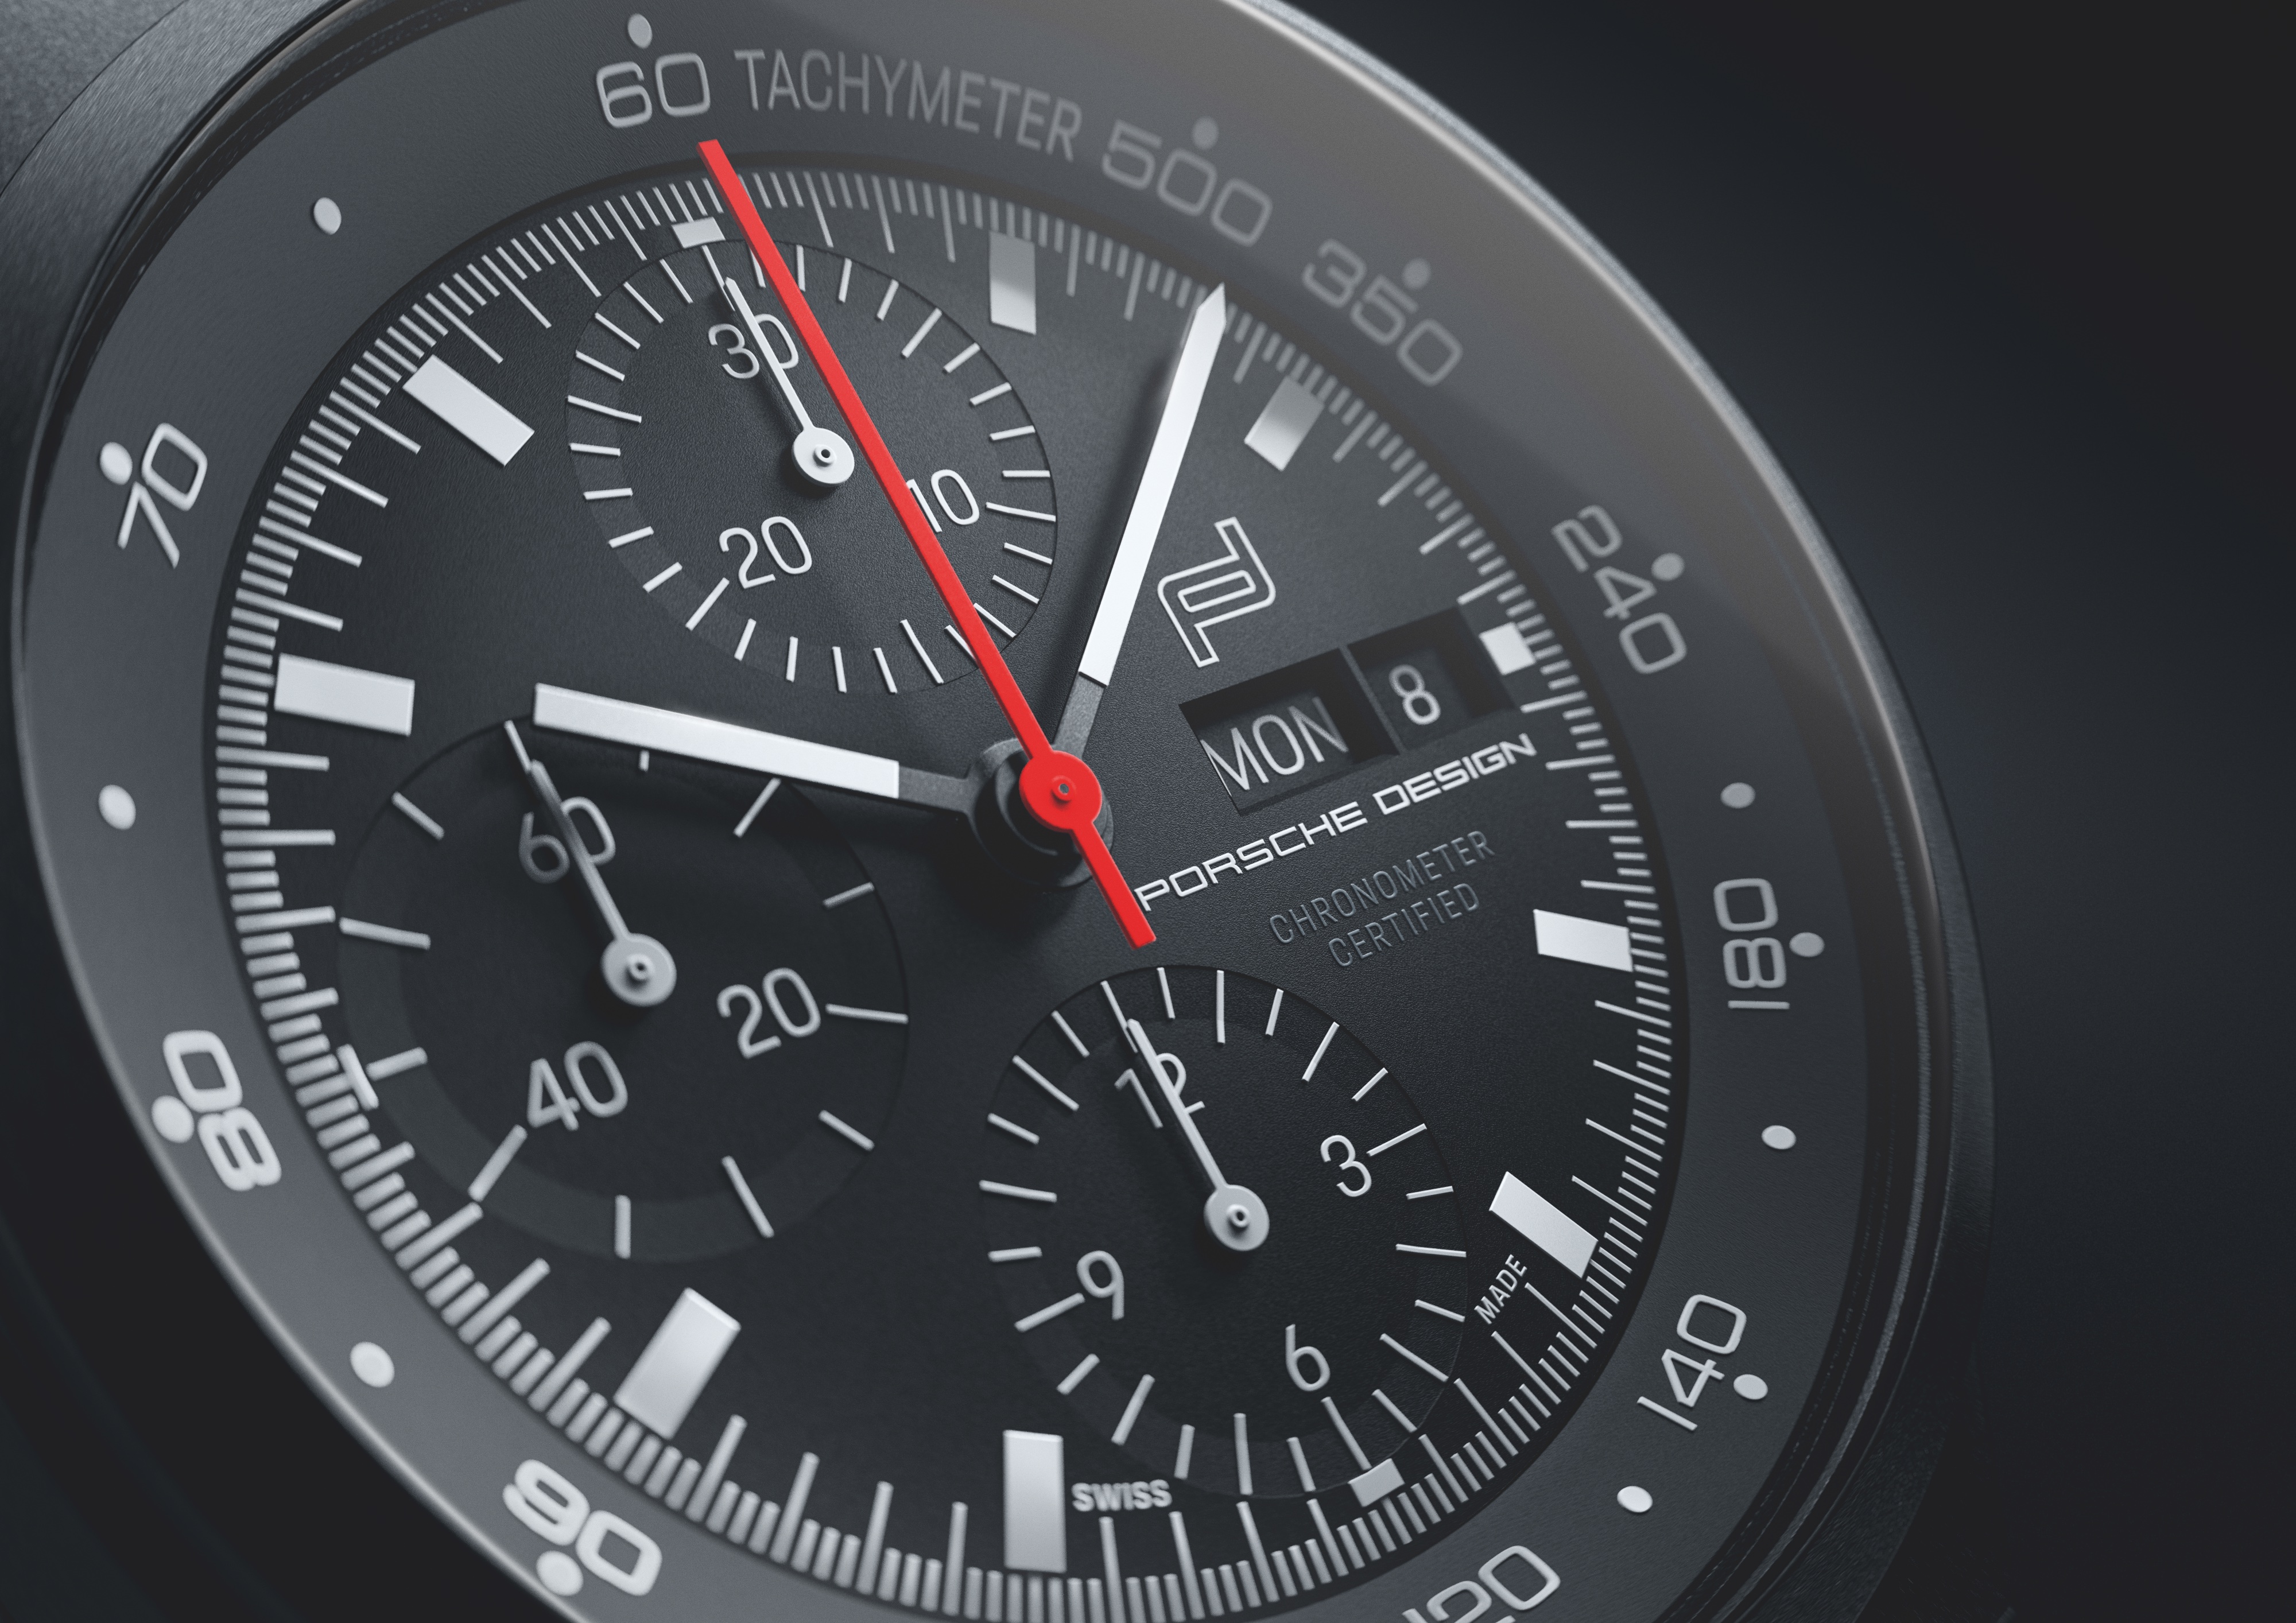 Chronograph 1 - All Black Numbered Edition